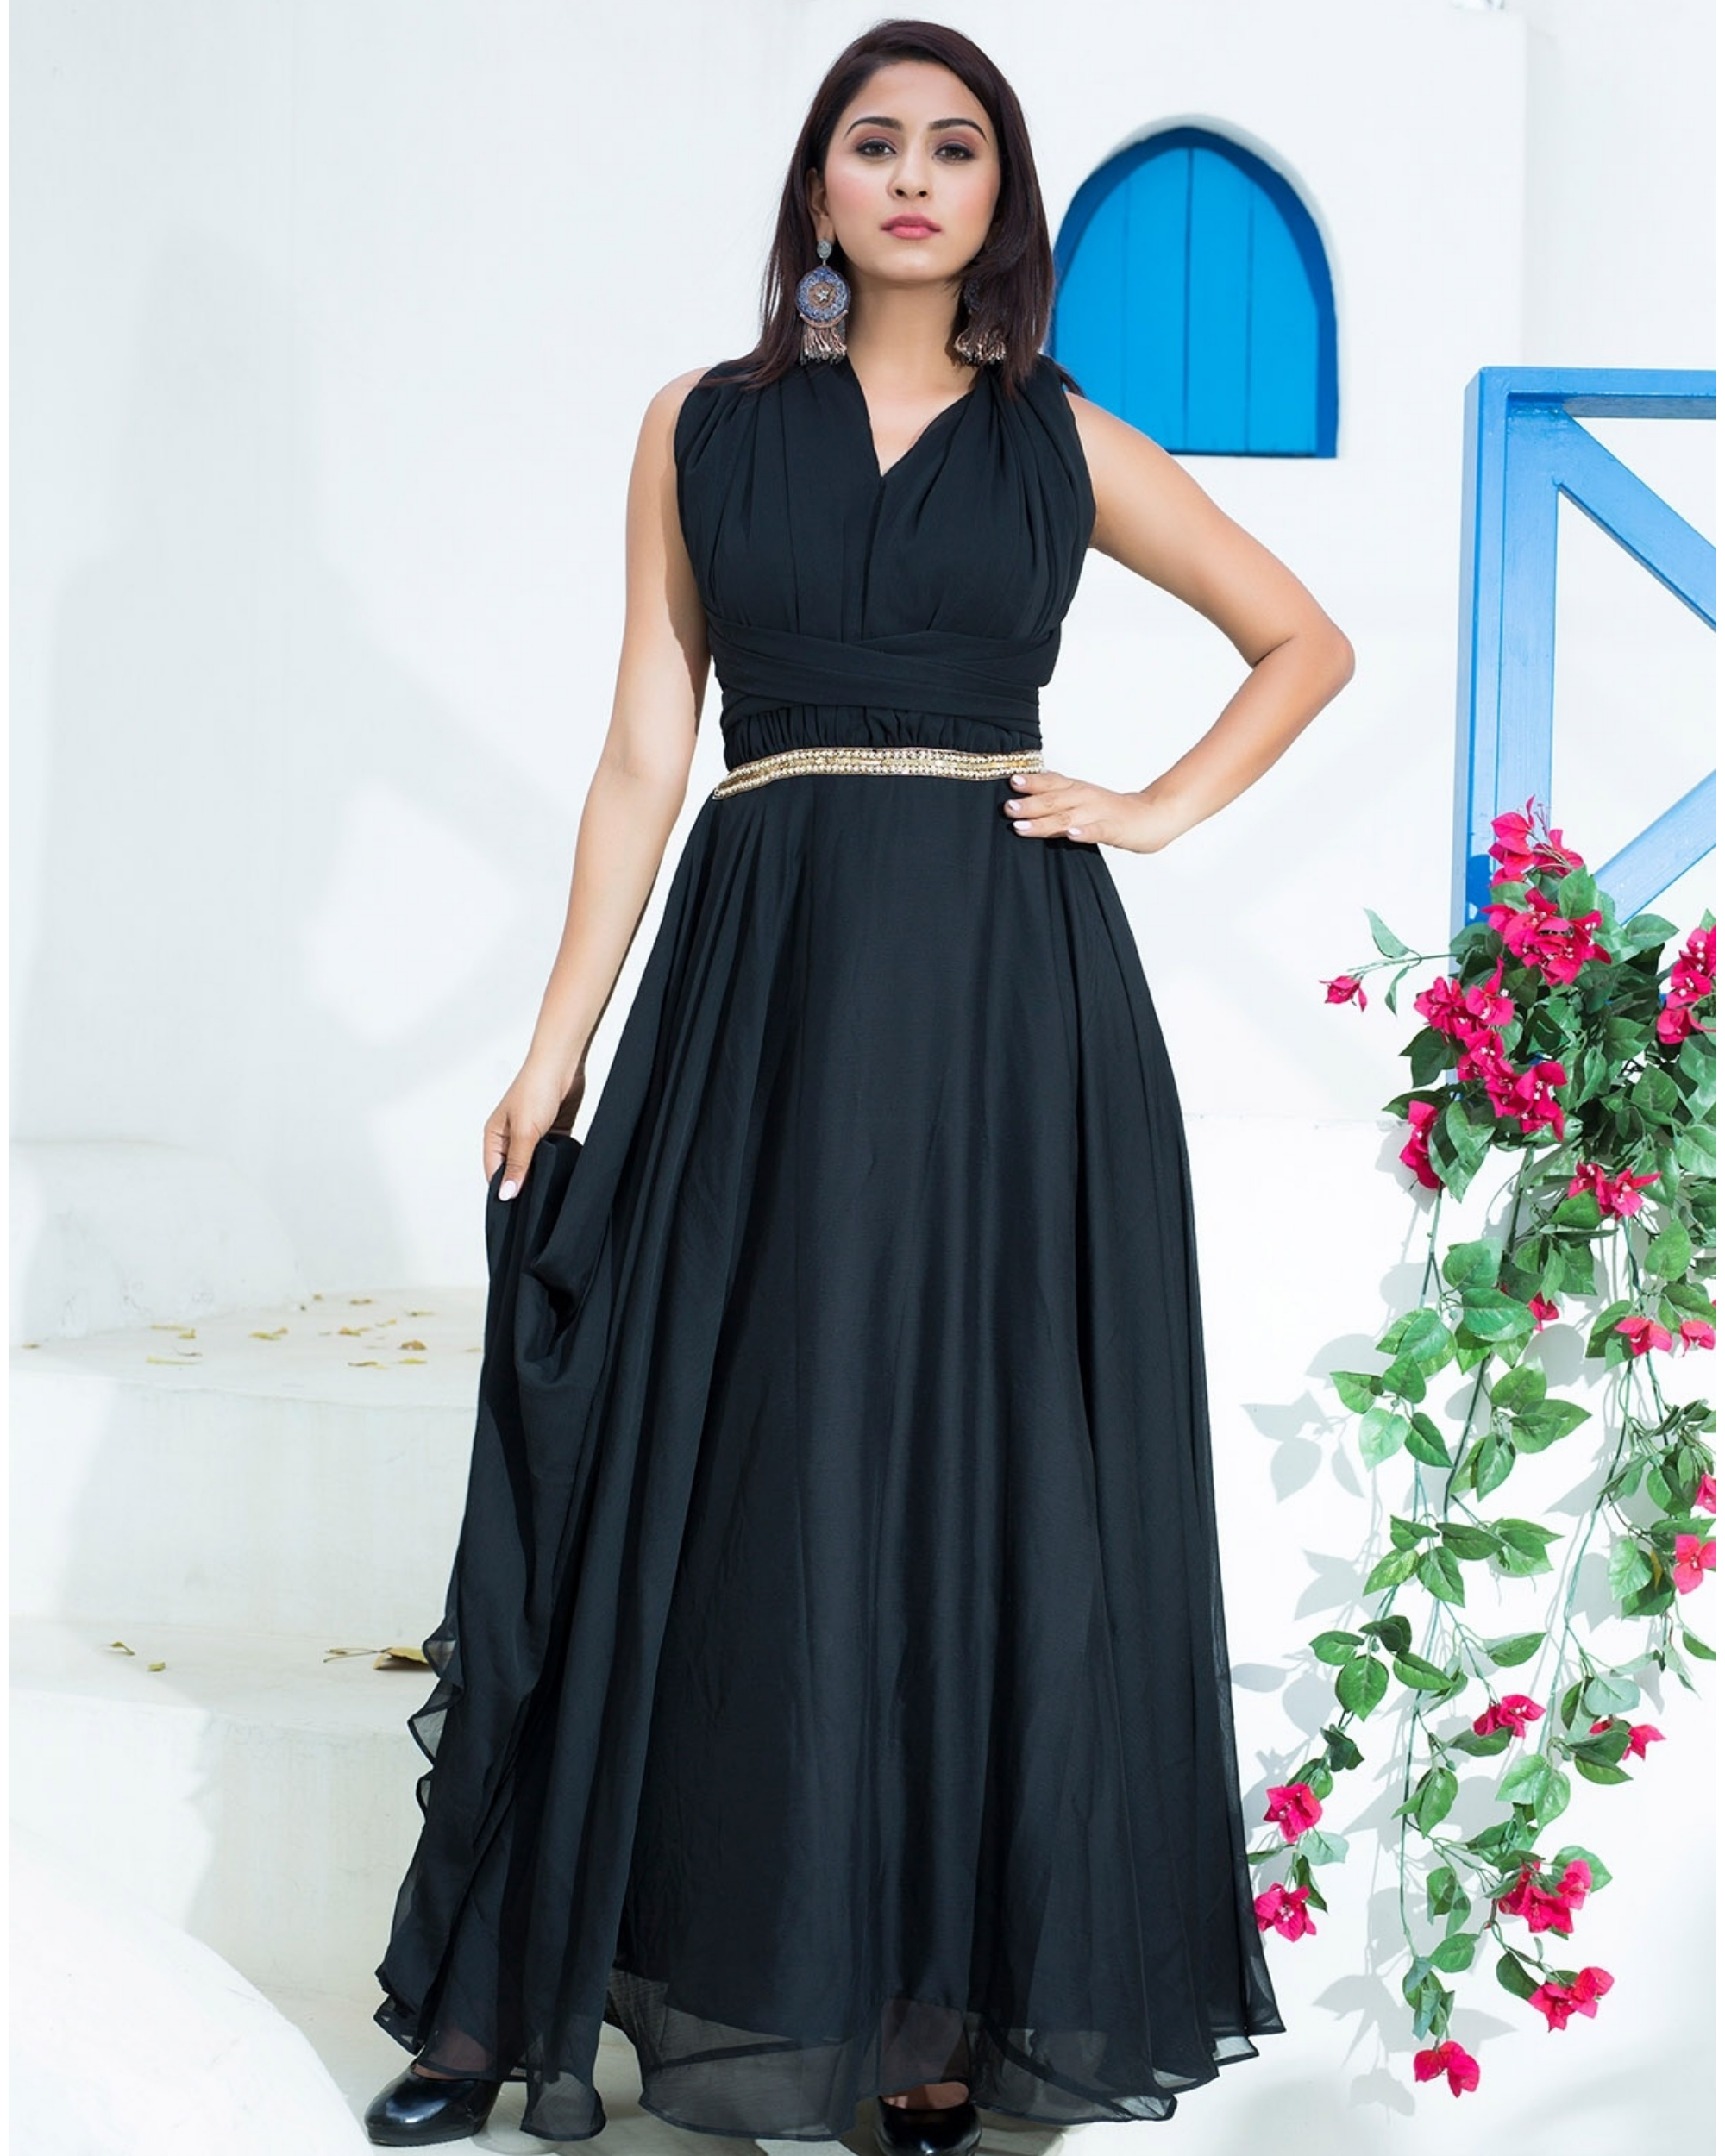 Black chiffon gown by Ambraee | The Secret Label